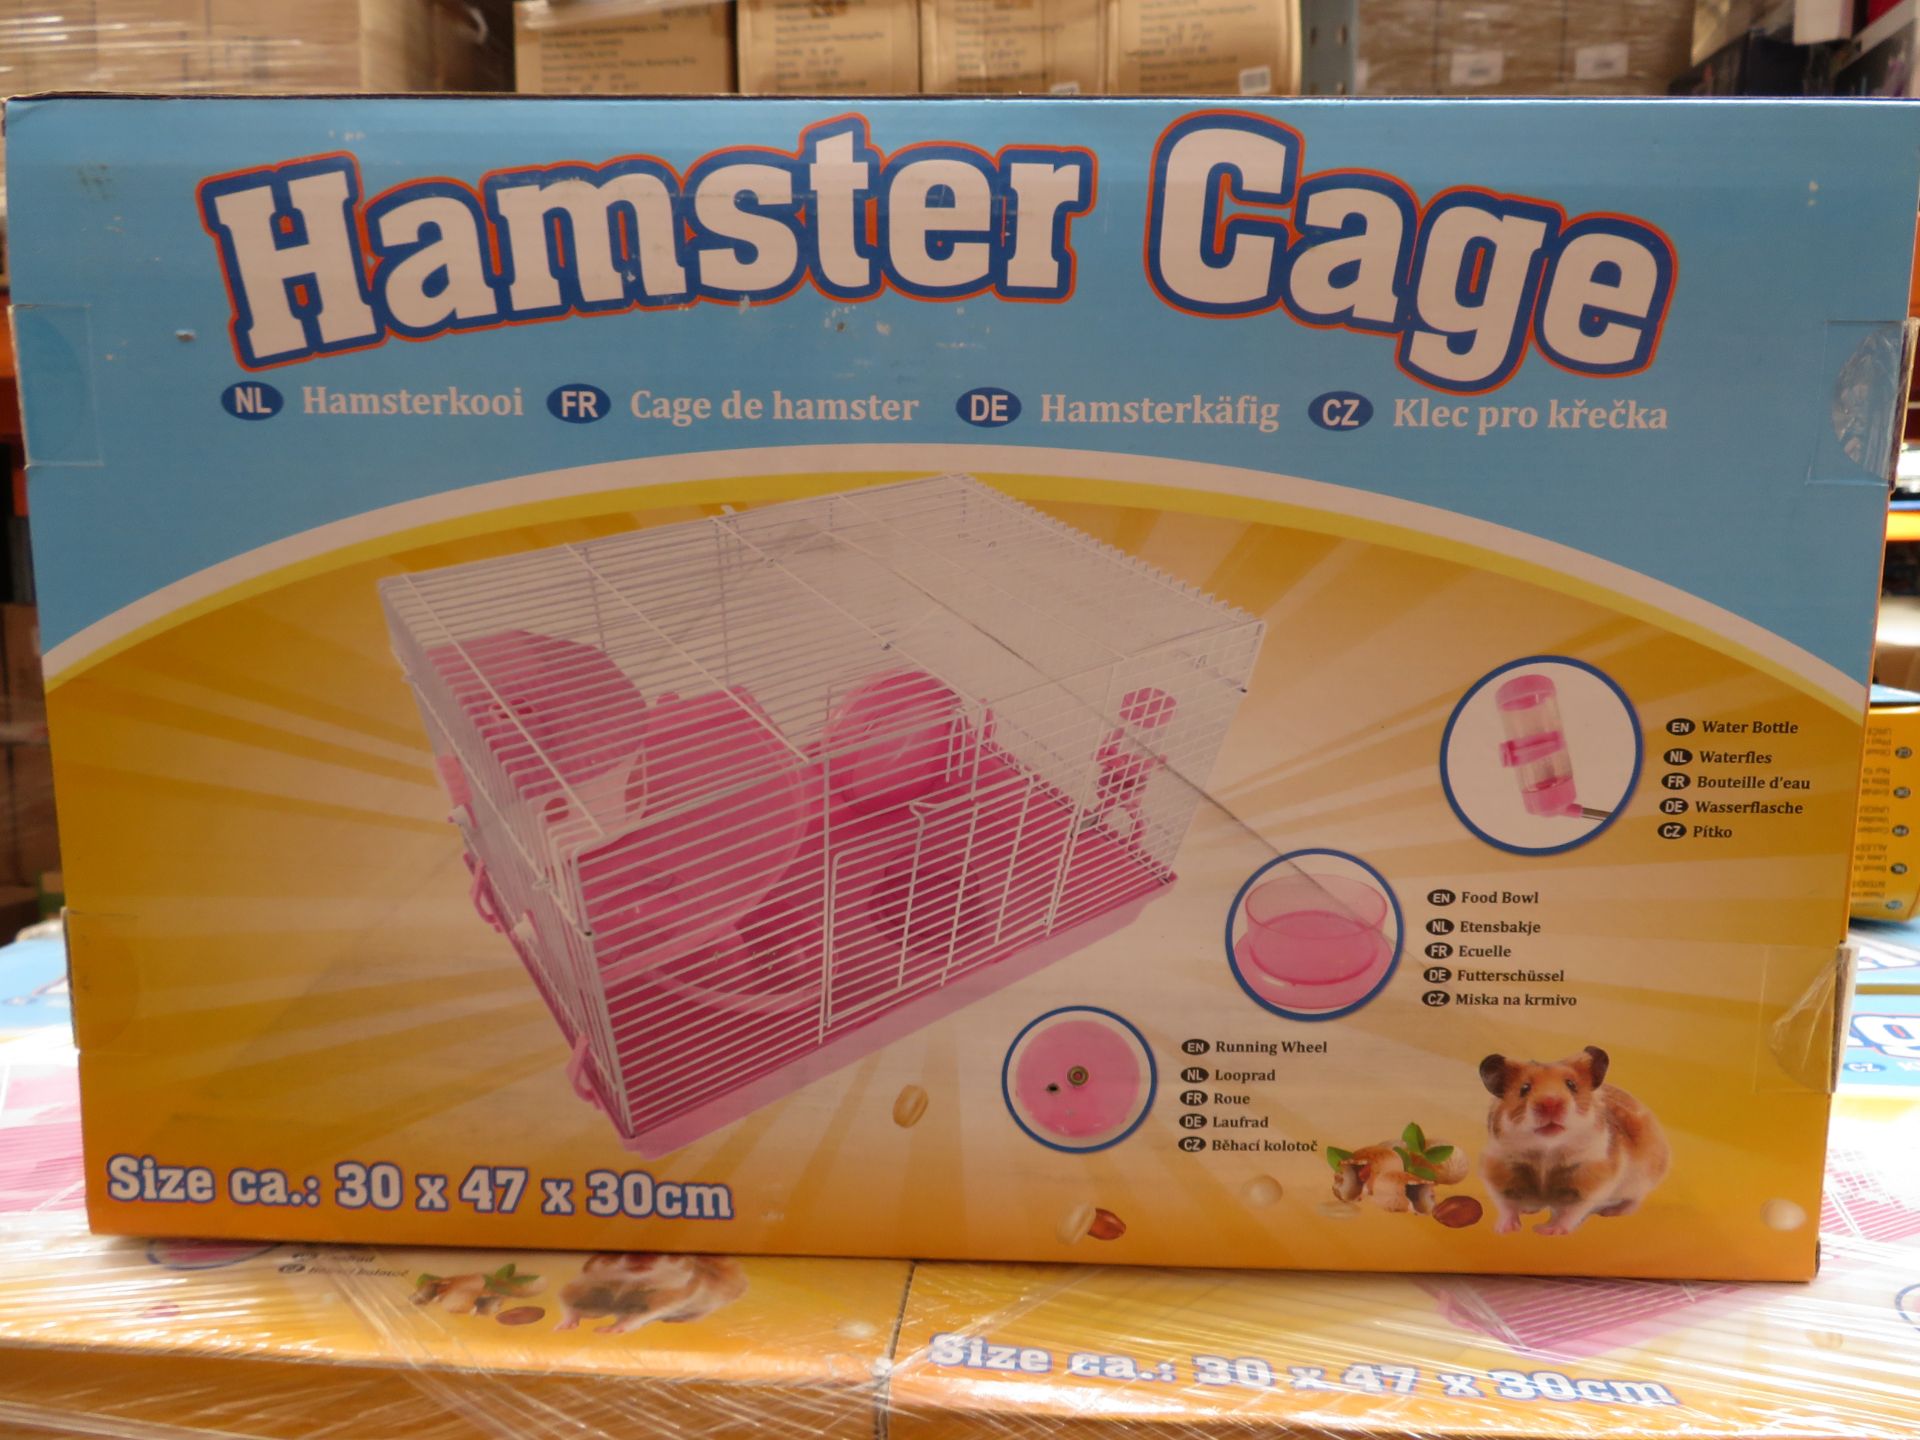 10 x Brand New Hamster Cages. Rrp £19.99 Each, Giving This Lot A Total Rrp Value Of £199.90. All